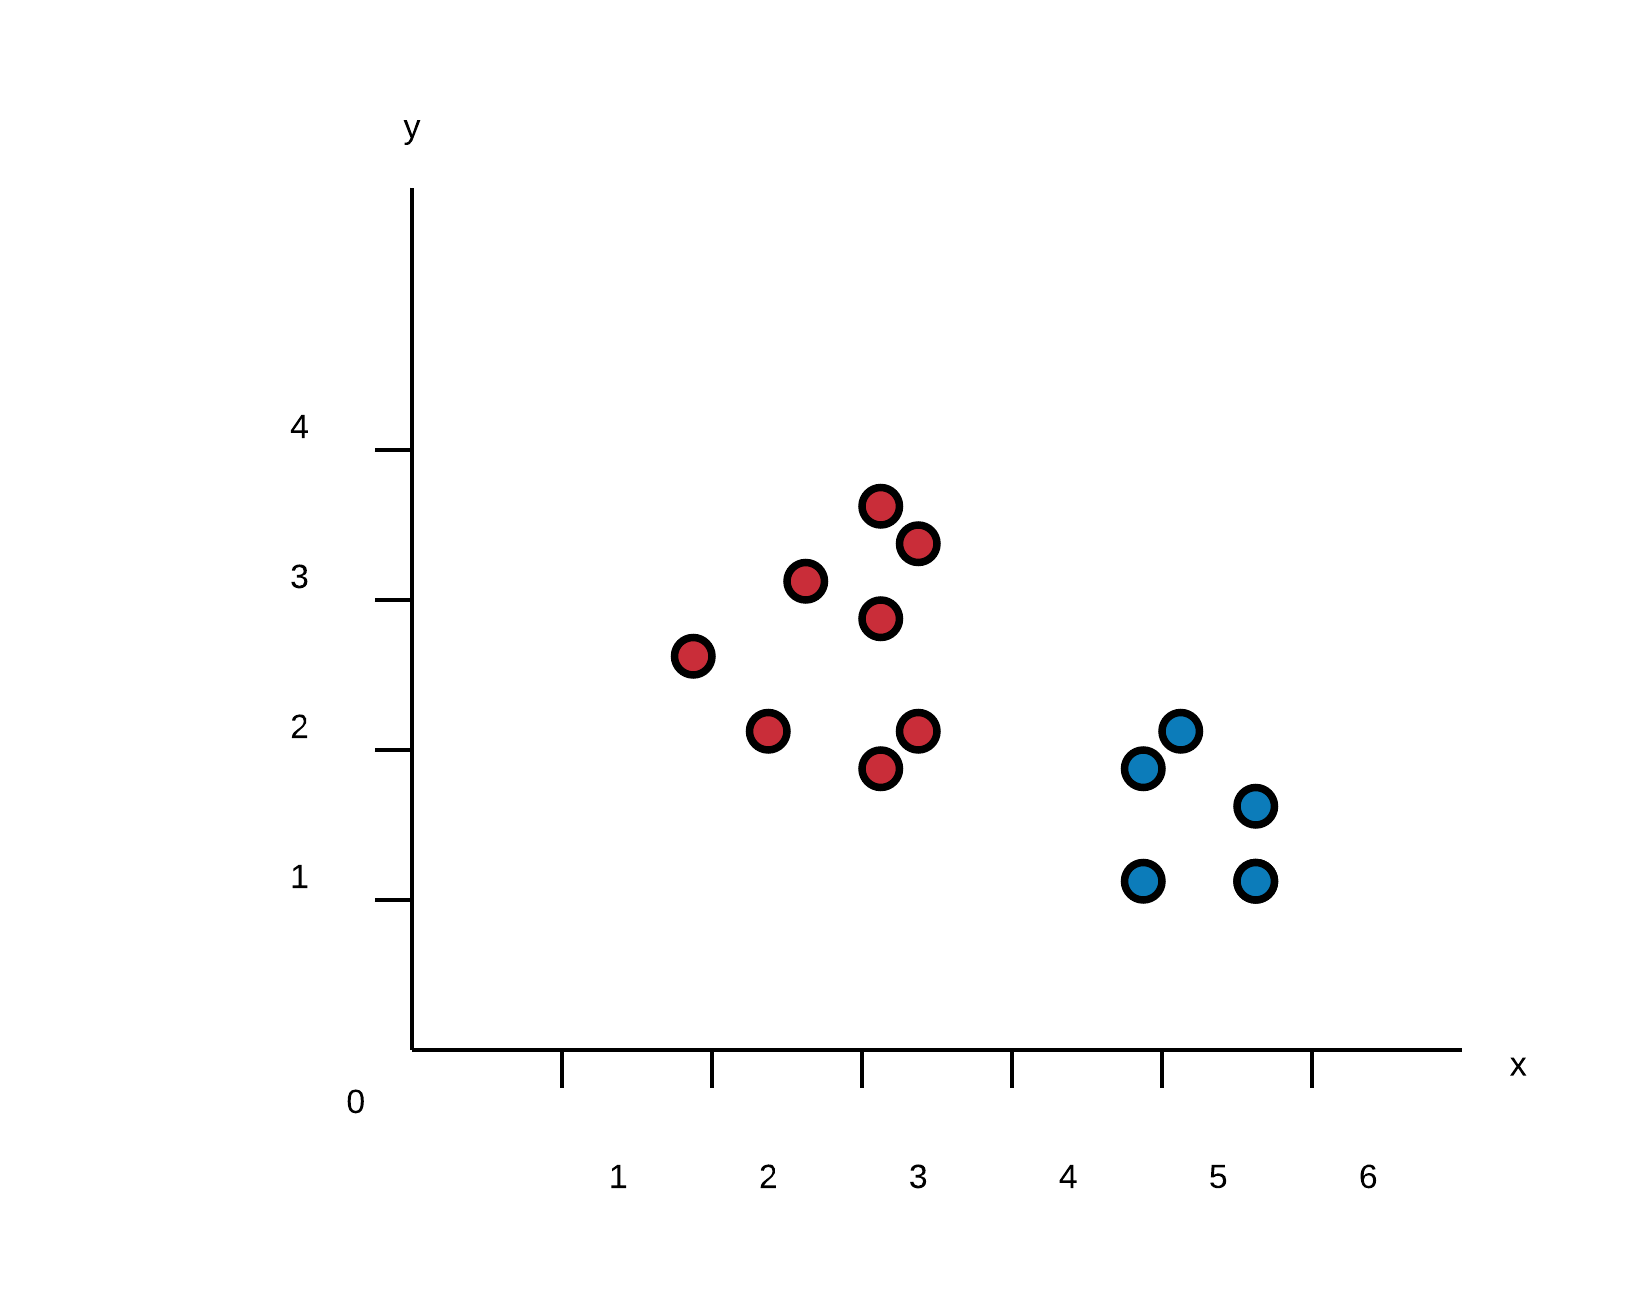 Clustering result in 2D euclidean space